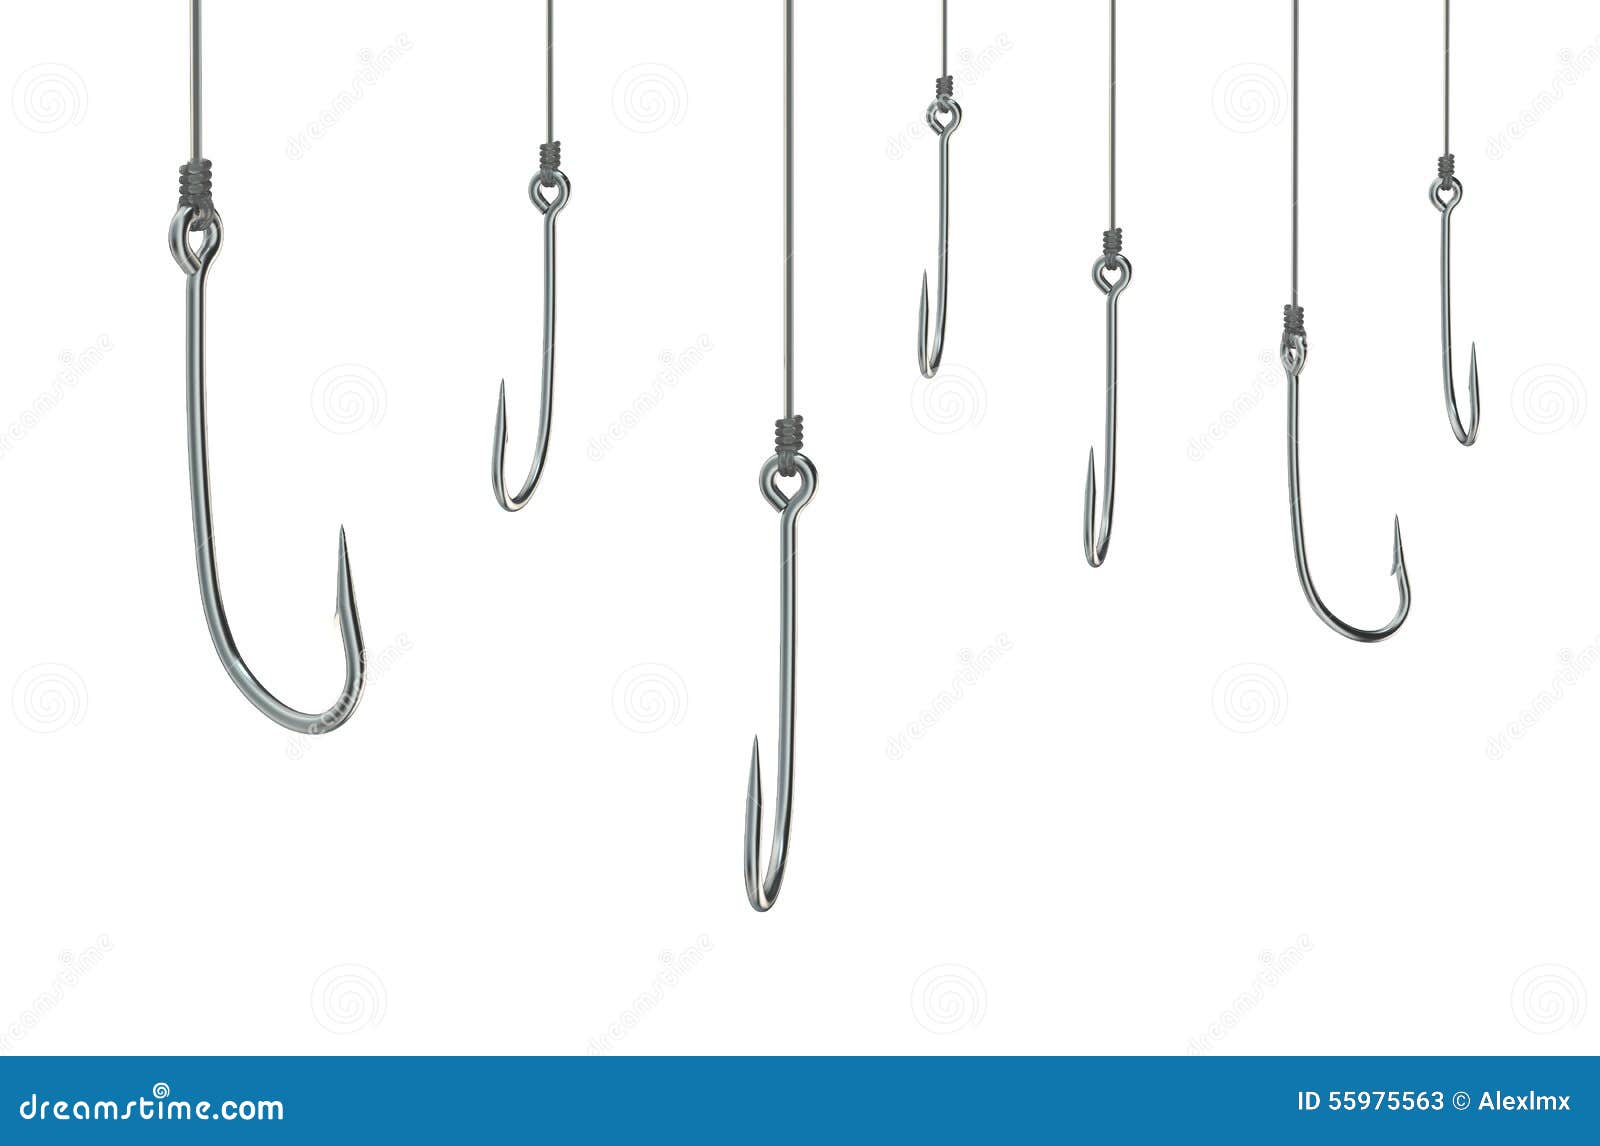 https://thumbs.dreamstime.com/z/group-empty-fishing-hooks-fishing-line-isolated-gray-background-55975563.jpg